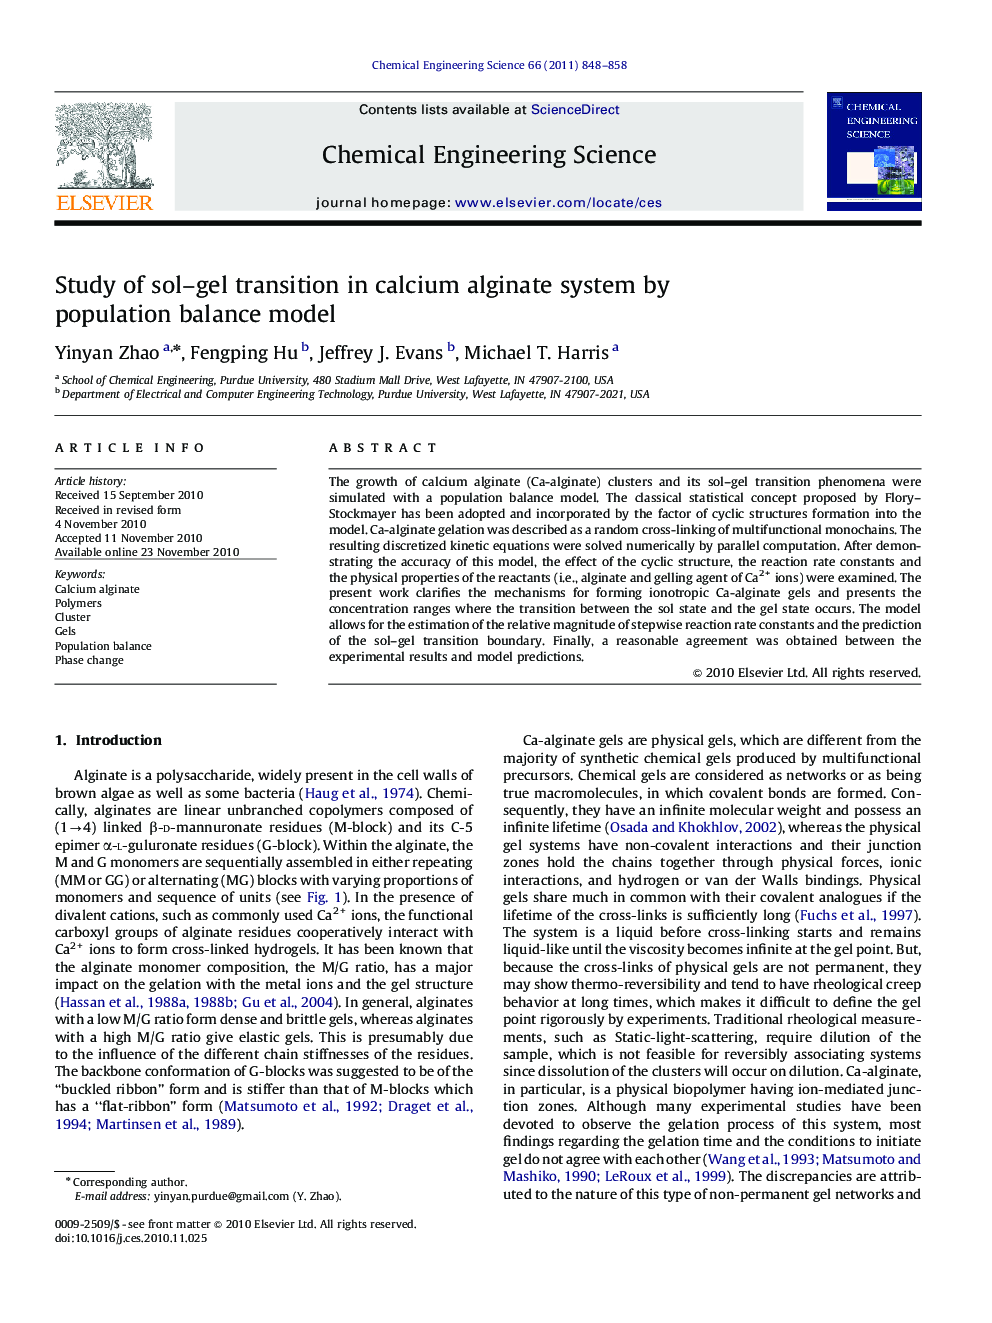 Study of sol–gel transition in calcium alginate system by population balance model